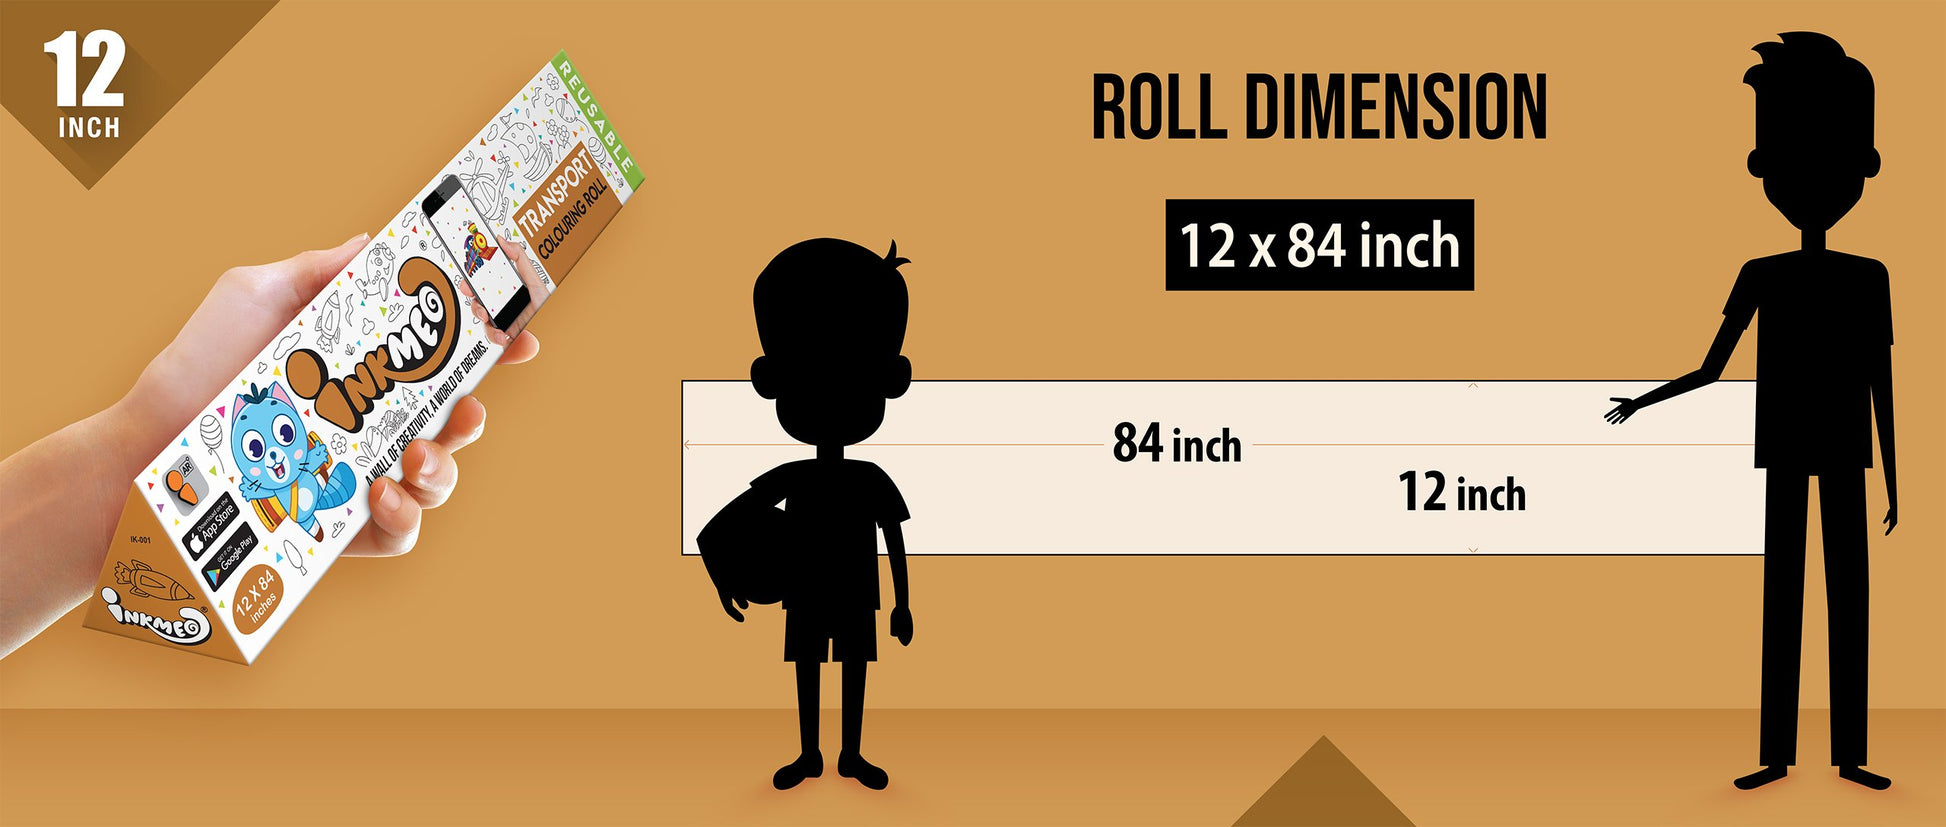 The image shows a brown background with a ruler indicating child and adult height on an 12*84 inch paper roll dimension.